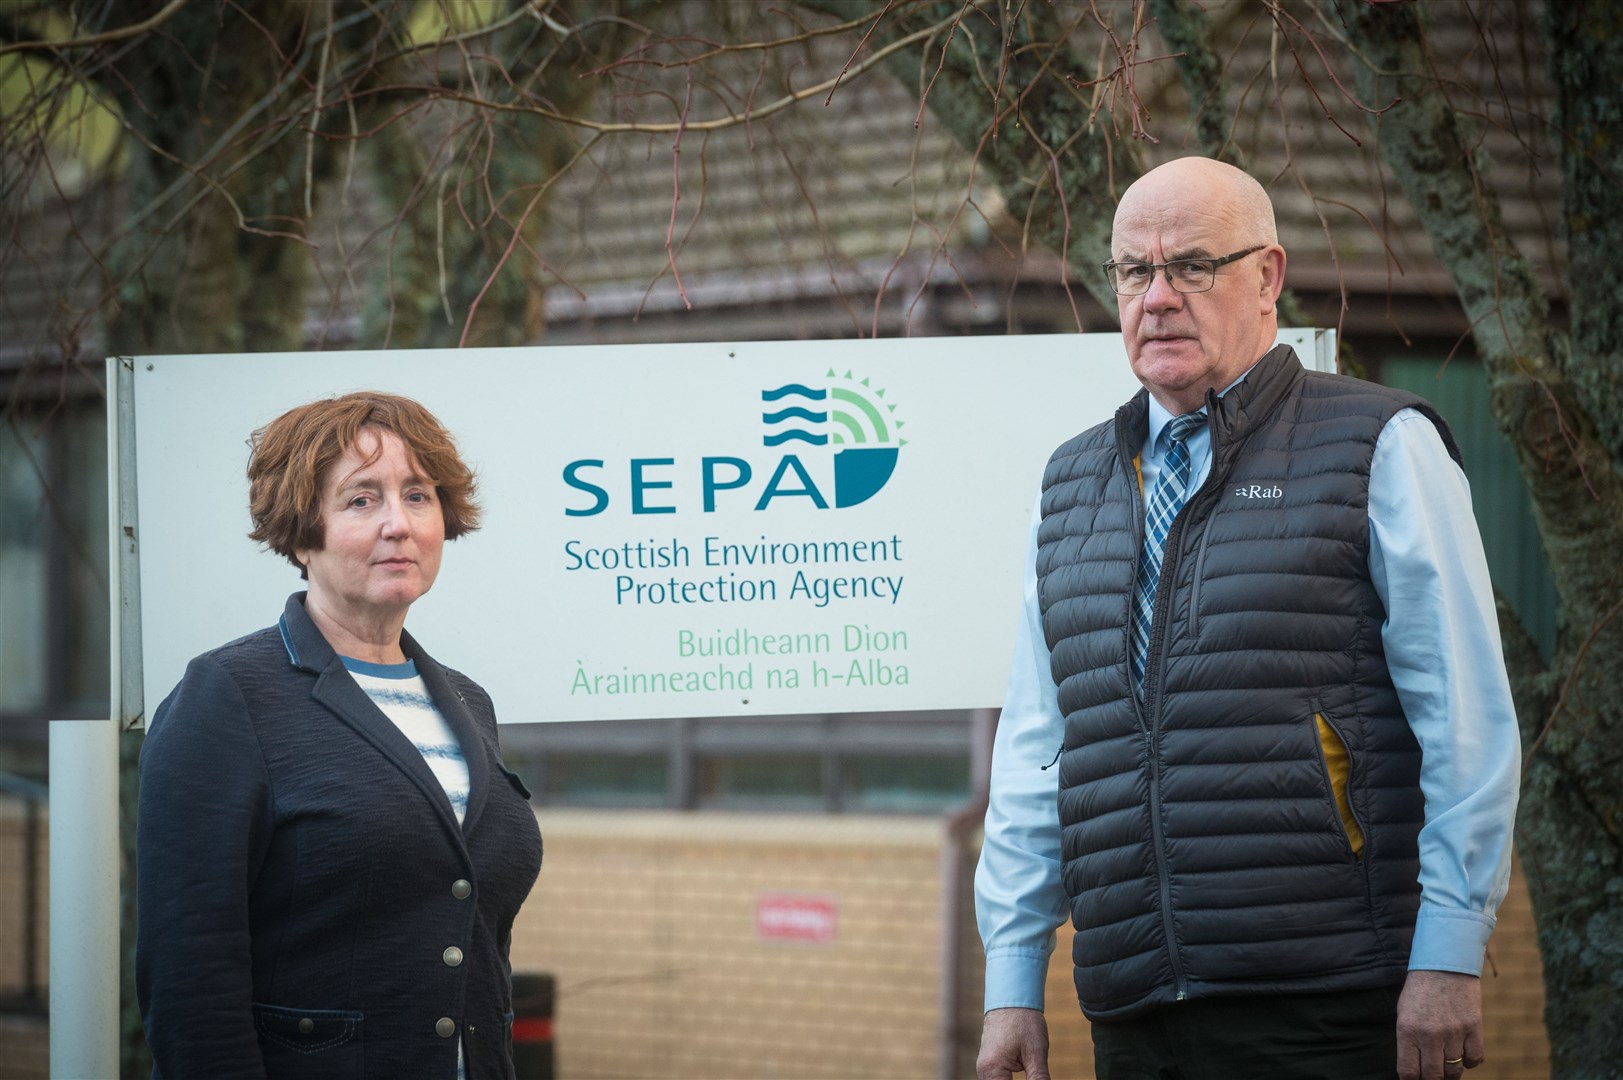 Businesses can't locate to the business park because.HIE/council failed to maintain flood defences. That.means SEPA has to object to planning despite having.offices there...Angela Maclean and Alister Mackinnon..